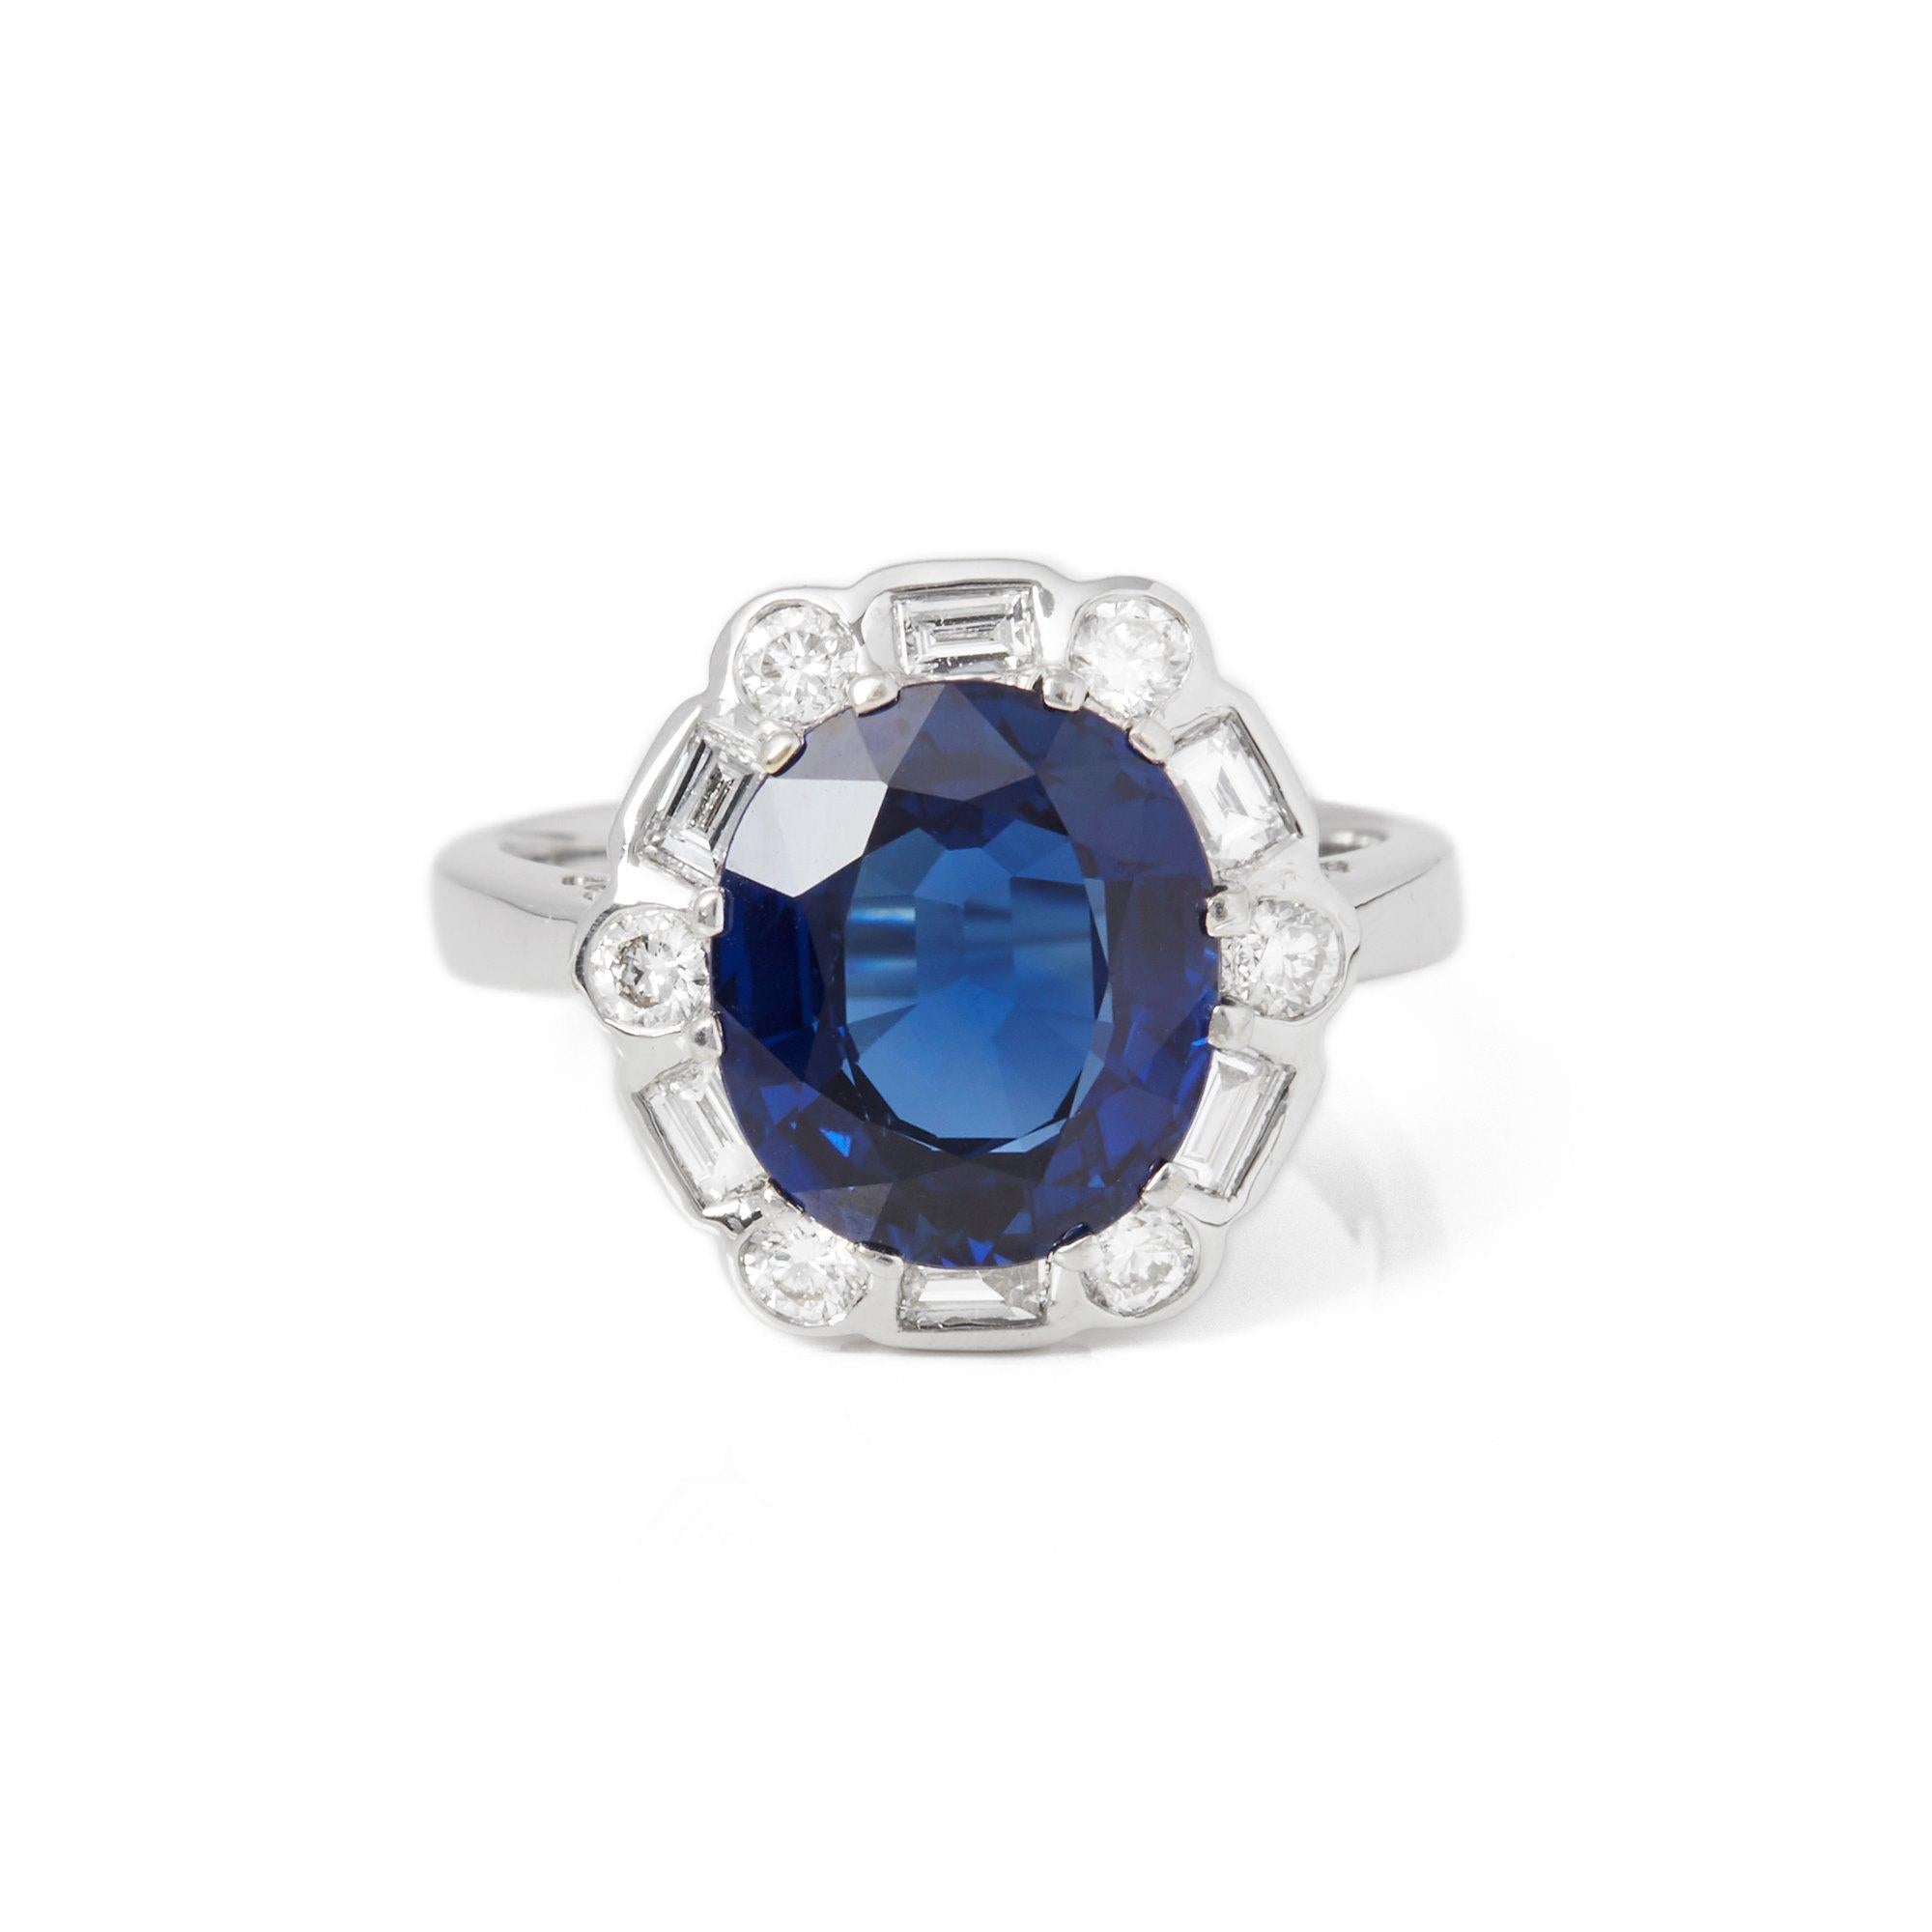 This ring designed by David Jerome is from his private collection and features one natural unheated oval cut Sapphire totalling 5.21cts sourced in Burma. Set with round brilliant cut Diamonds totalling 0.65cts mounted in an 18k white gold setting.